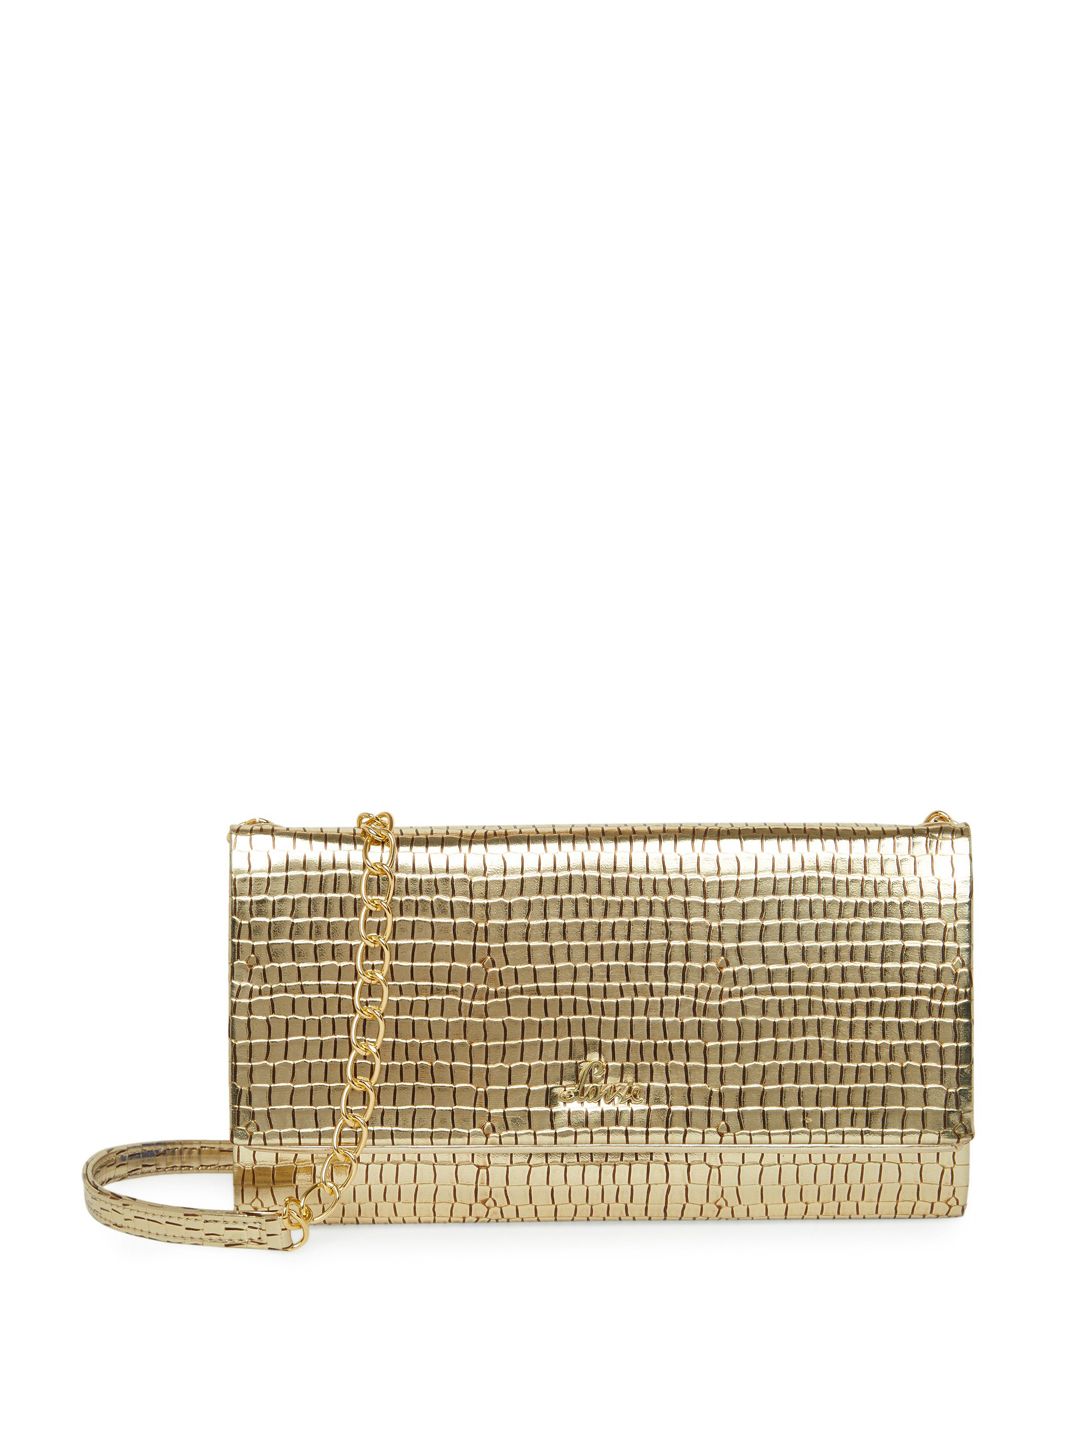 Lavie Gold-Toned Textured PU Structured Sling Bag Price in India